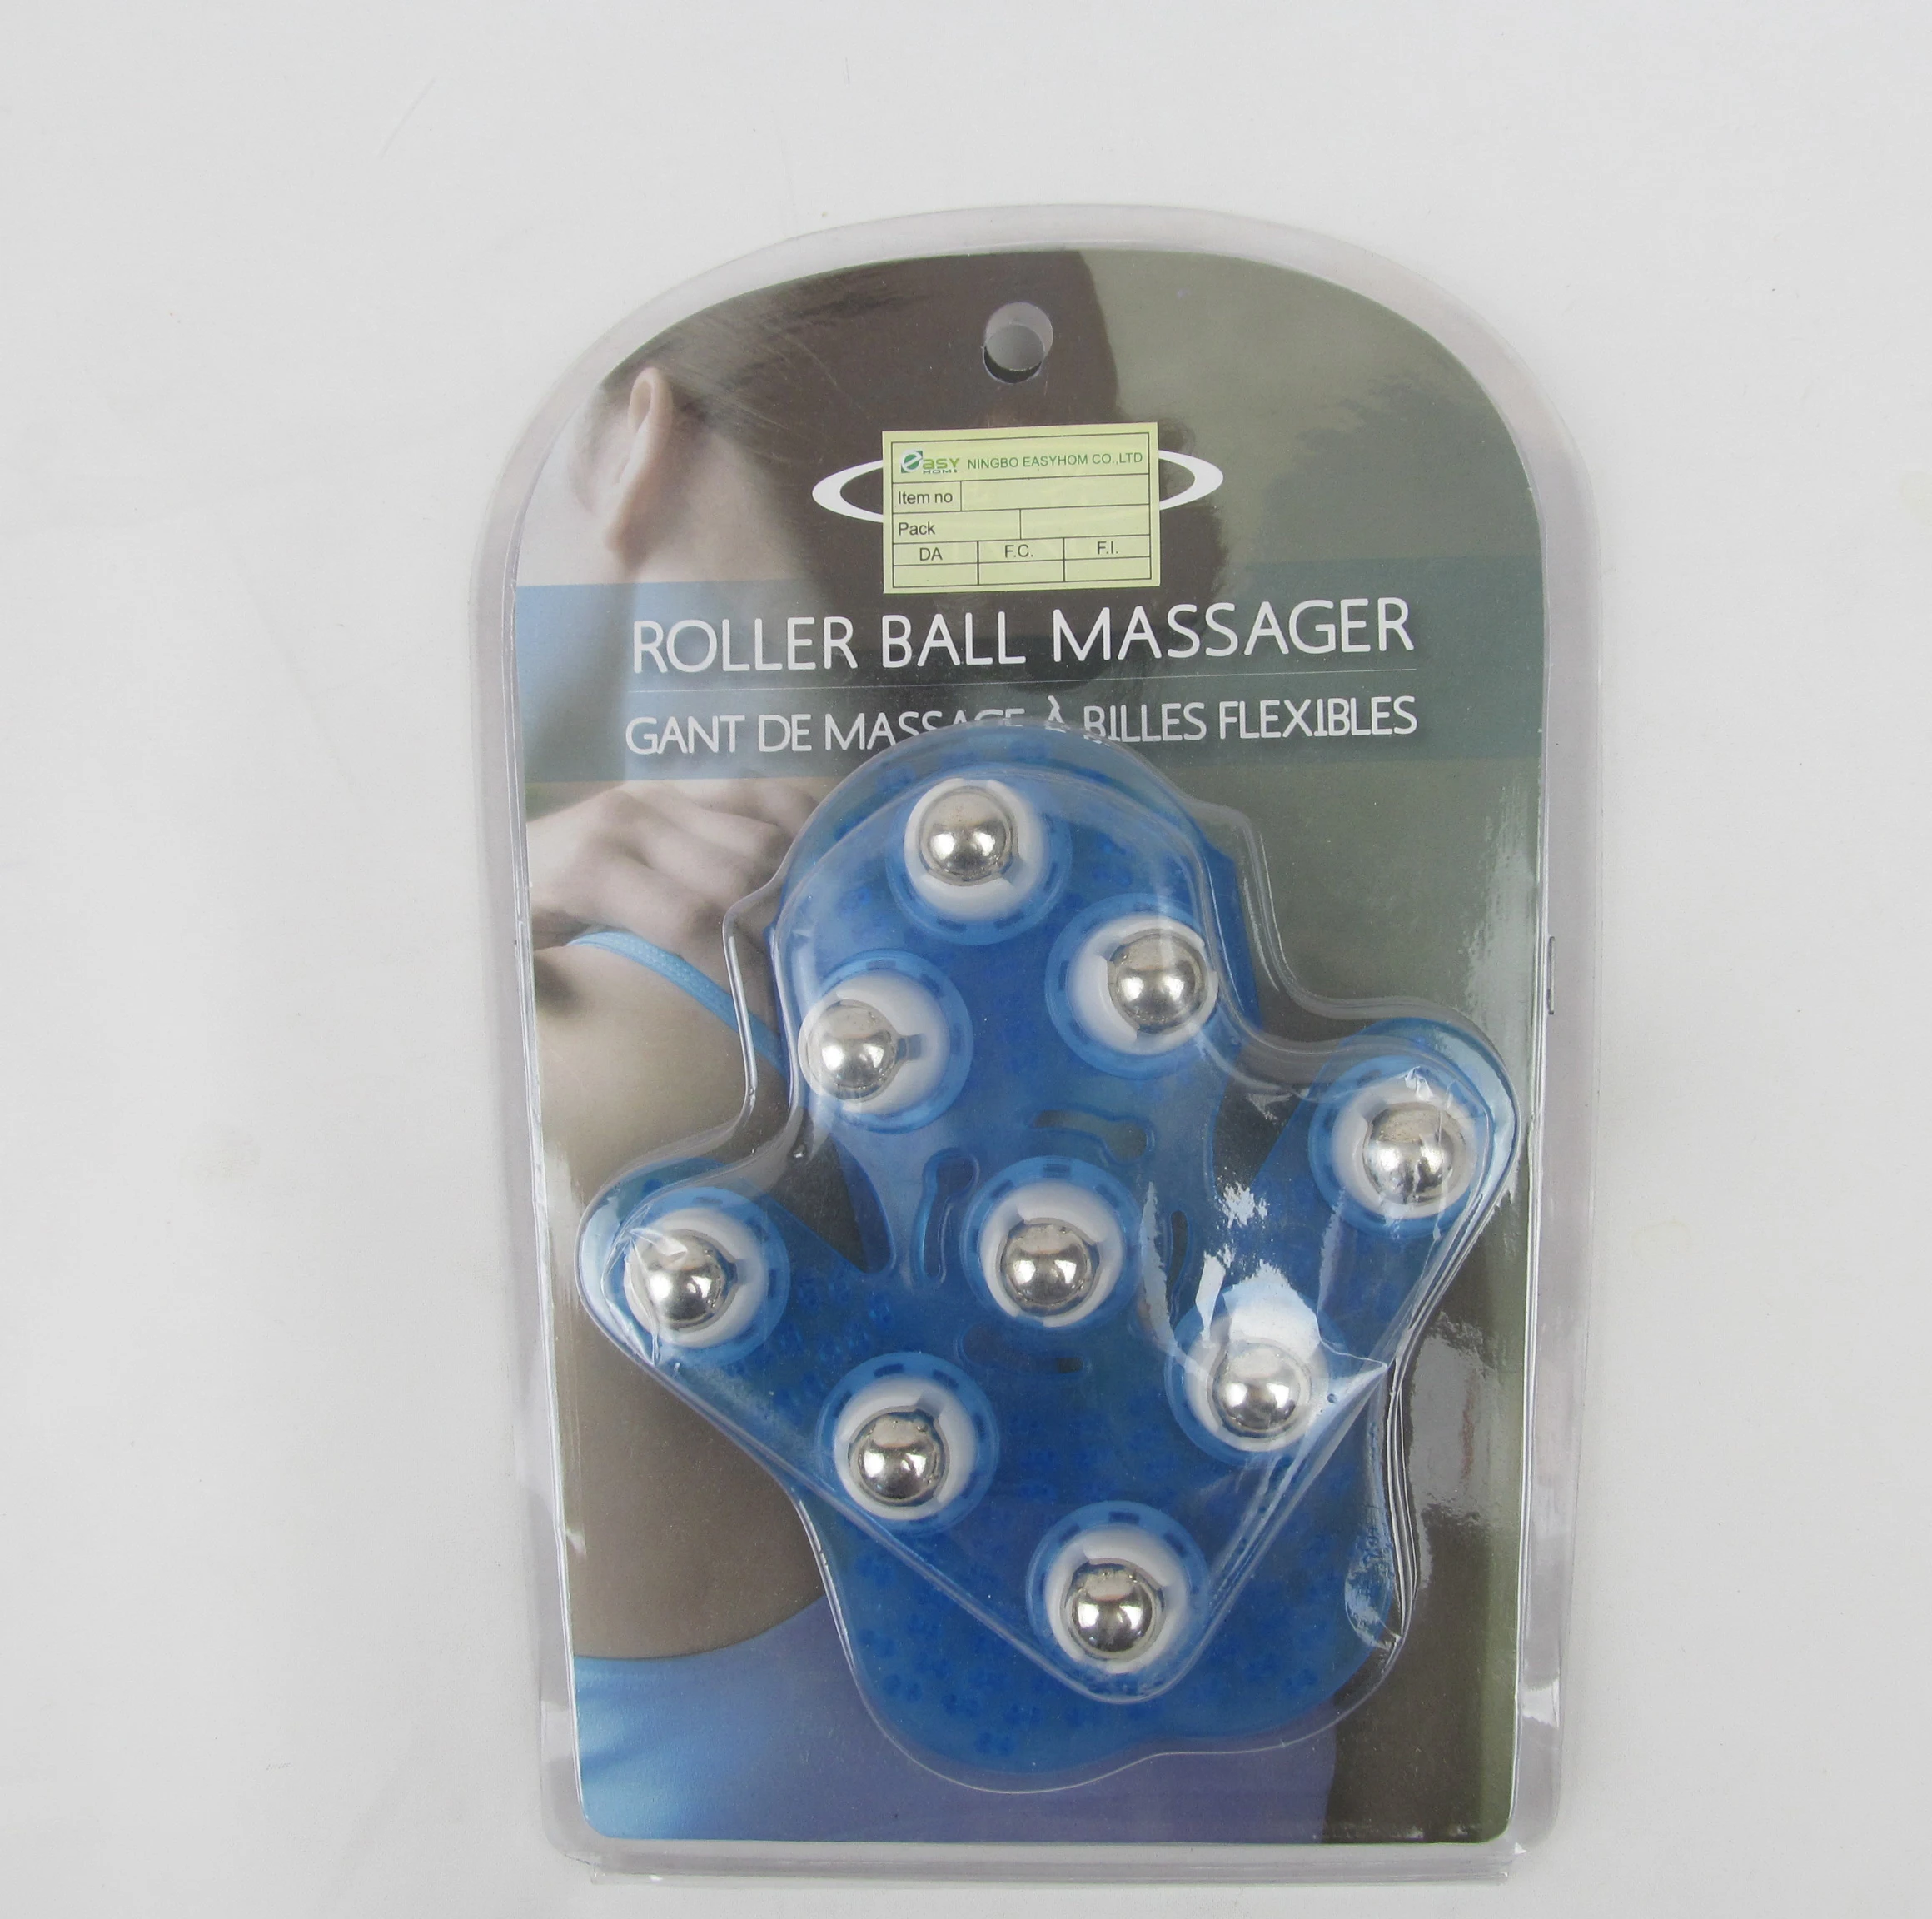 Palm Shaped Massage Glove Body Massager With 9 360 Degree Roller 訳あり